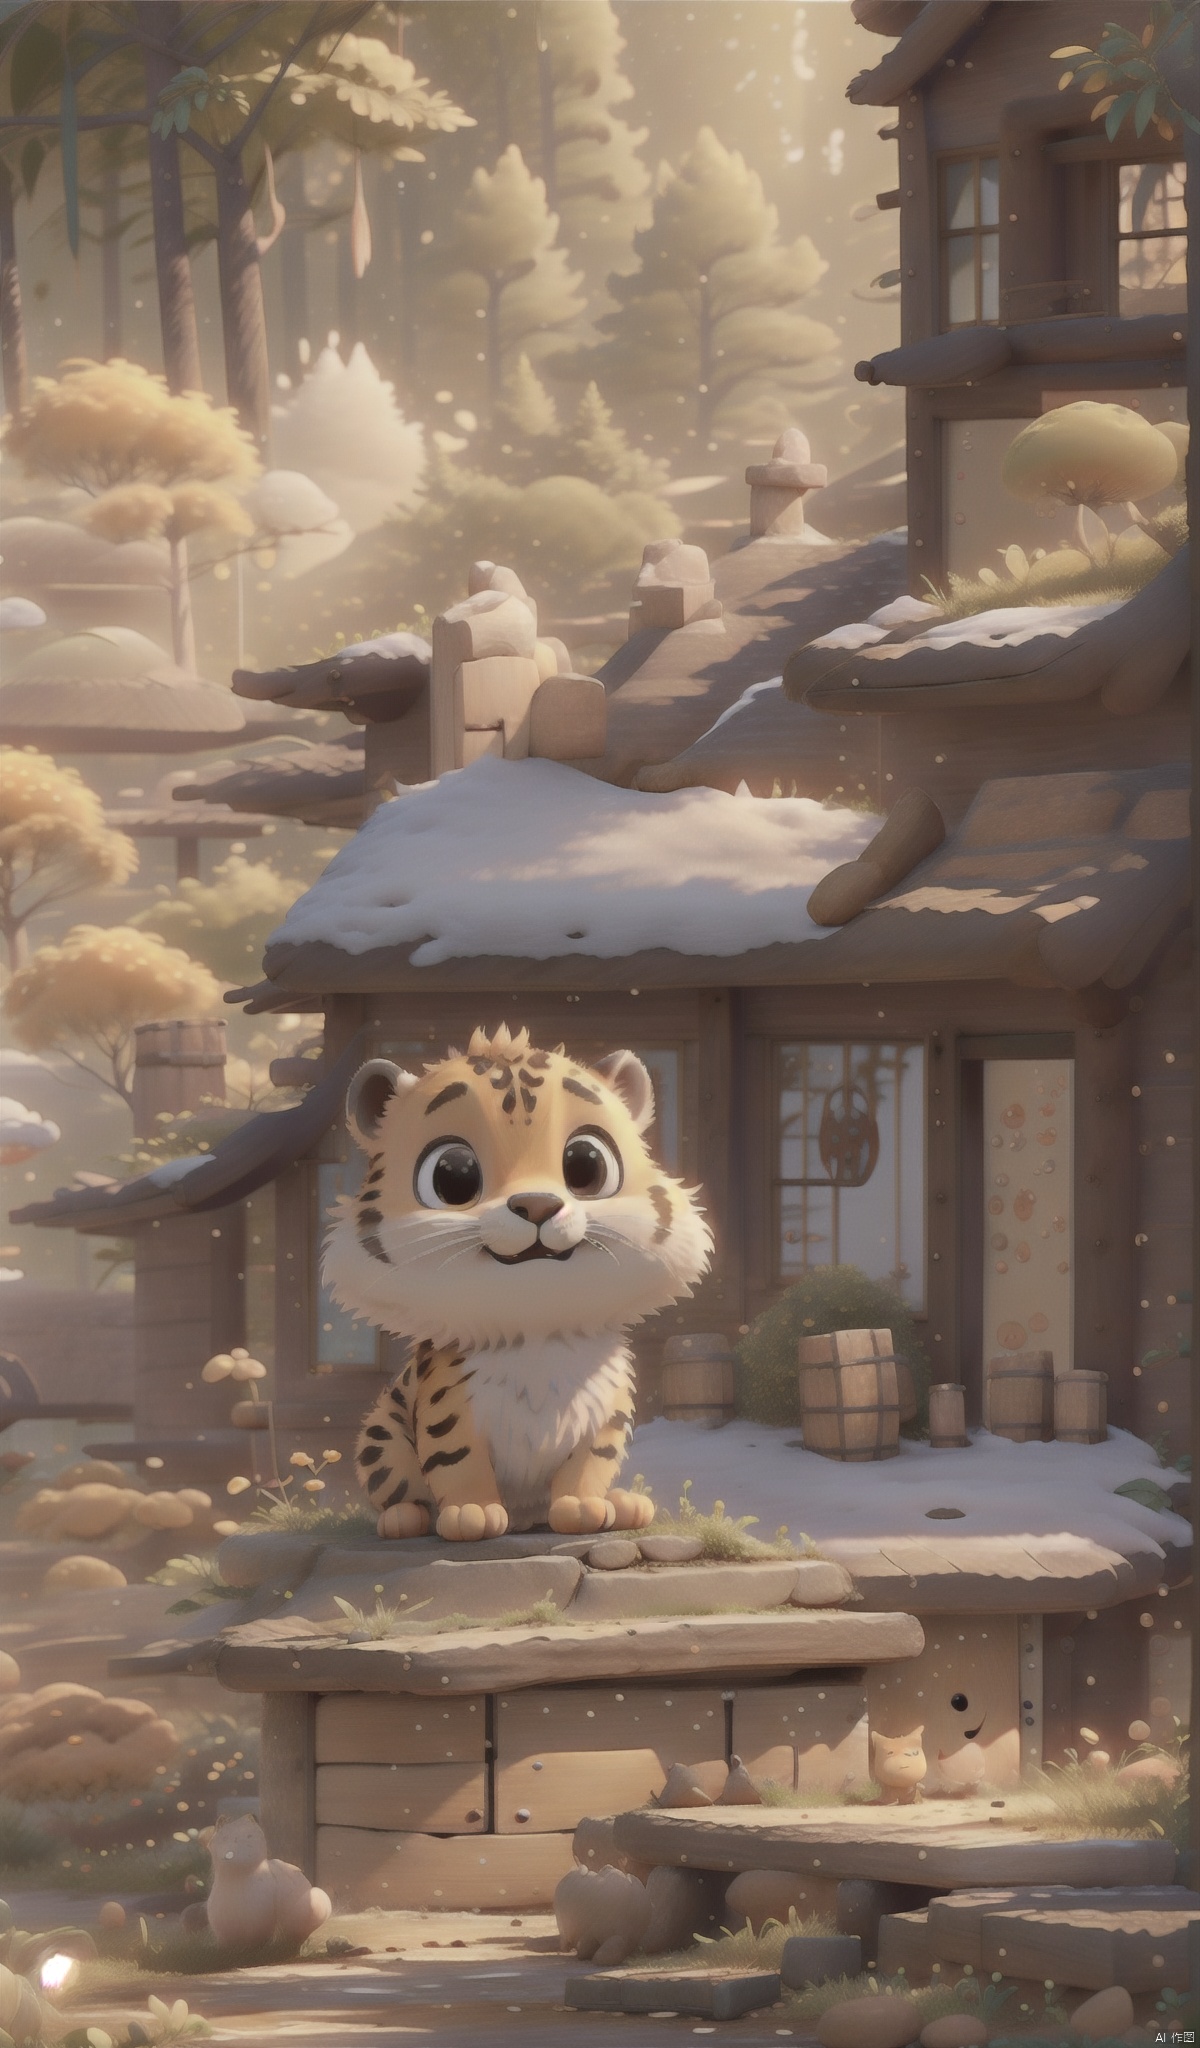  A cute little tiger stands in front of the house with a bigforestinthebackground,迪士尼, wu, 2D ConceptualDesign, cozy animation scenes, backlight